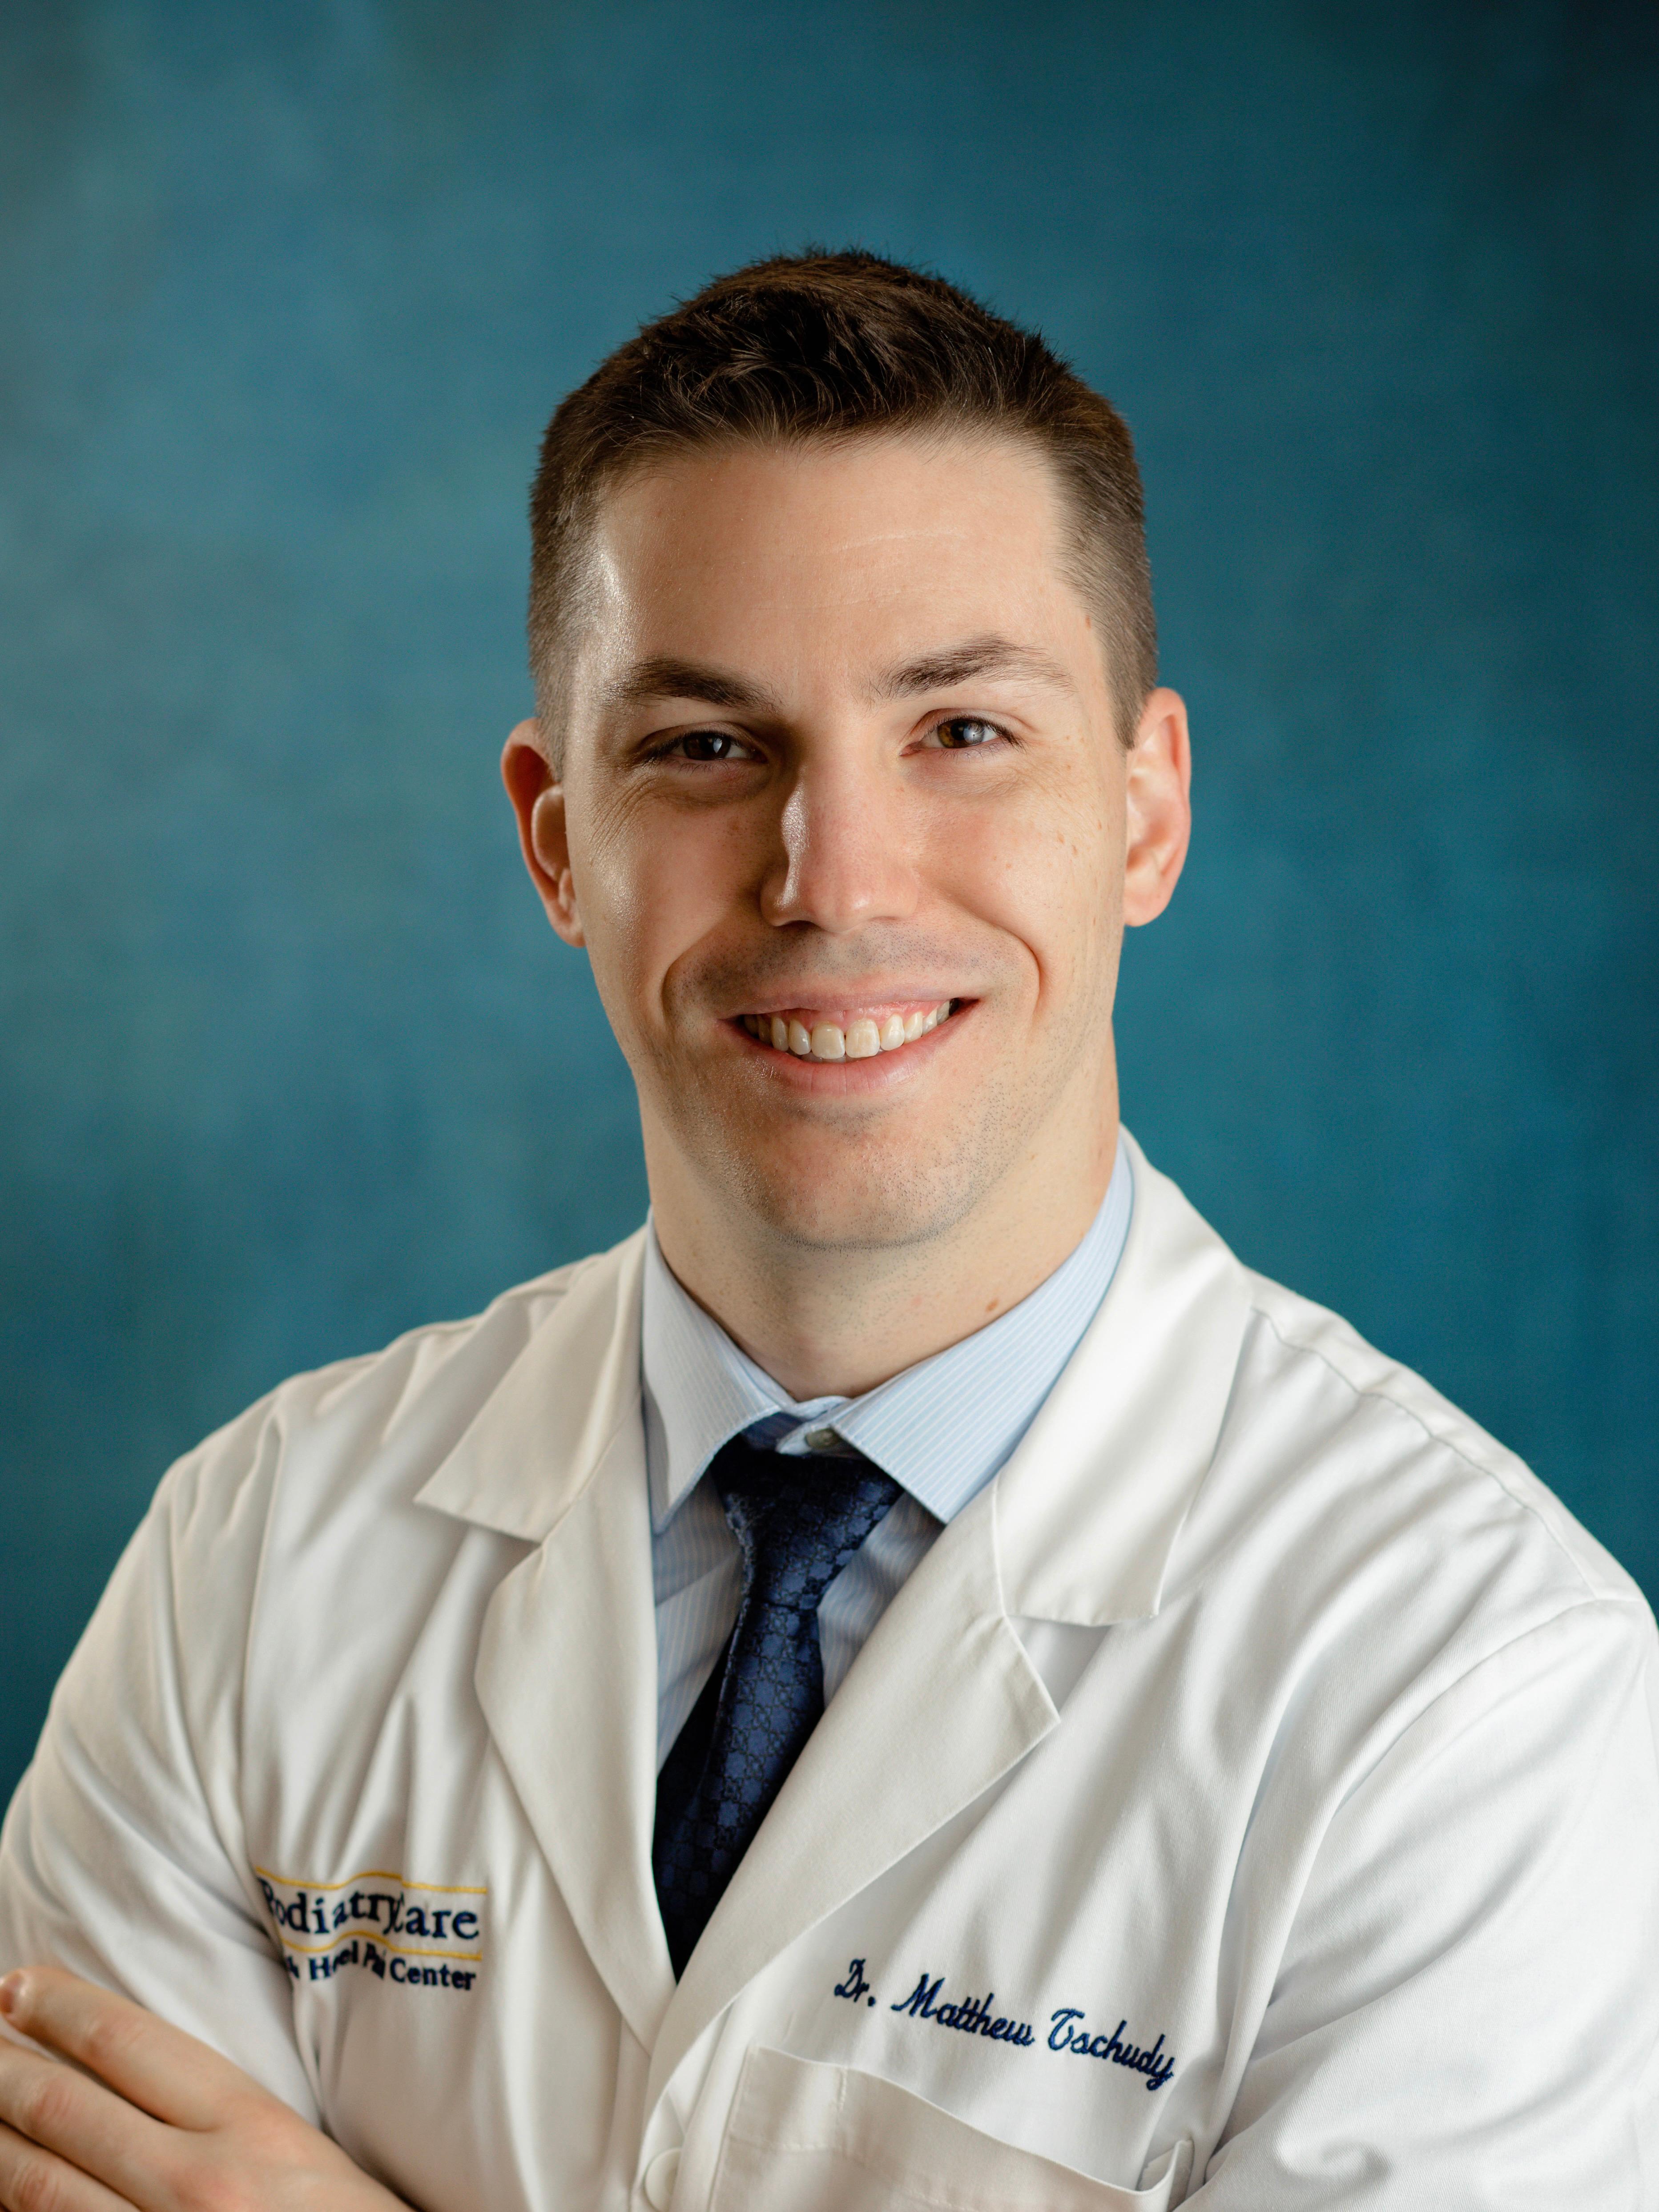 Matthew Tschudy, DPM PodiatryCare, PC and the Heel Pain Center Enfield (860)741-3041